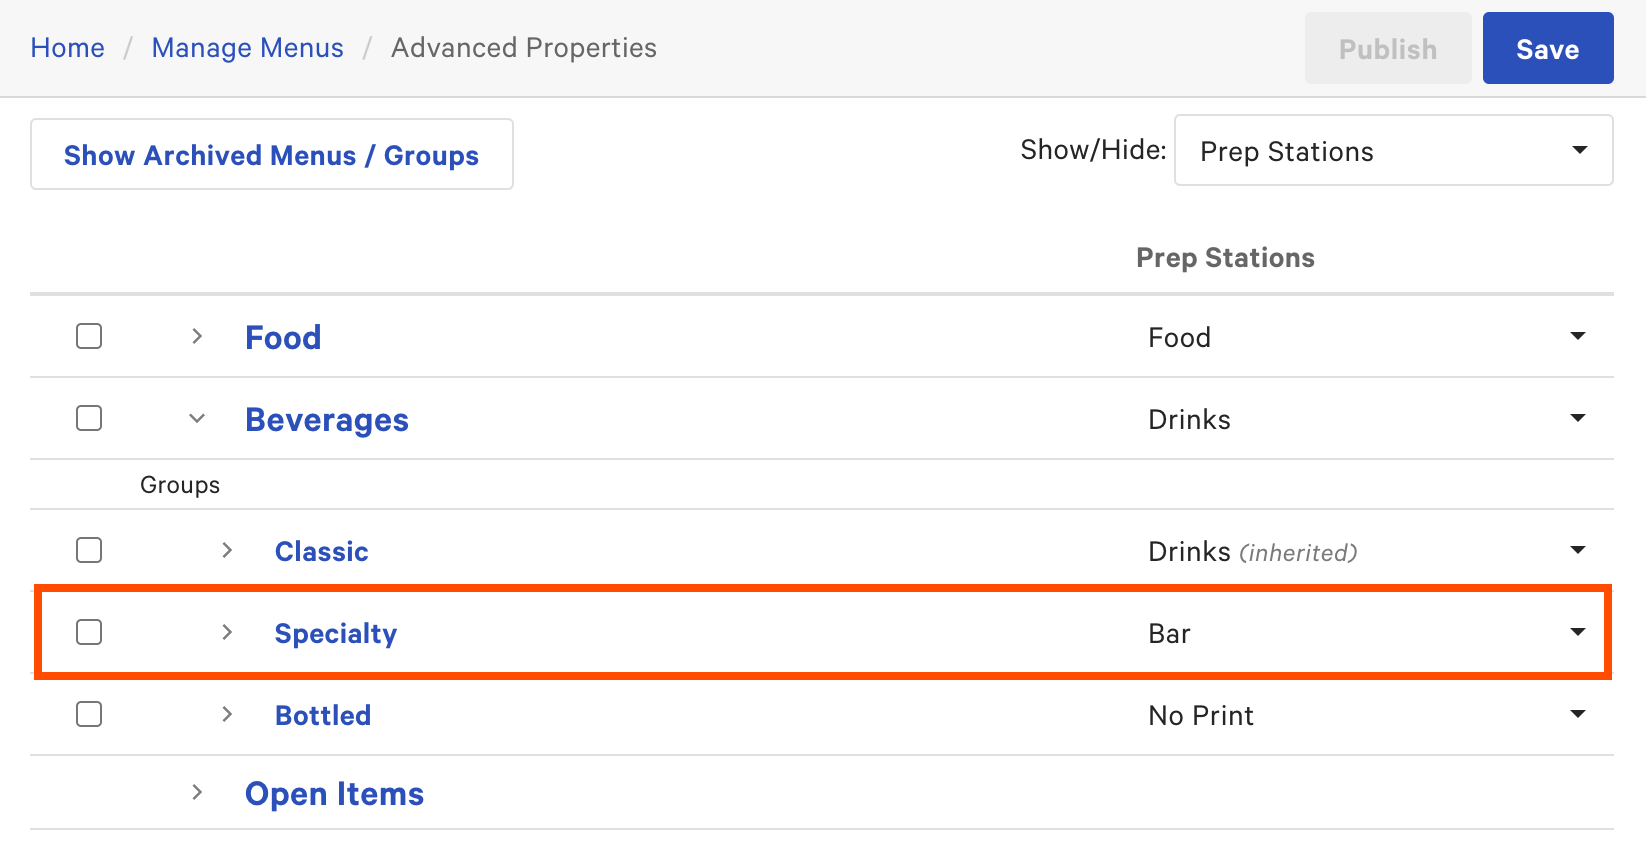 The Advanced Properties page with Specialty items routed to the Bar prep station.